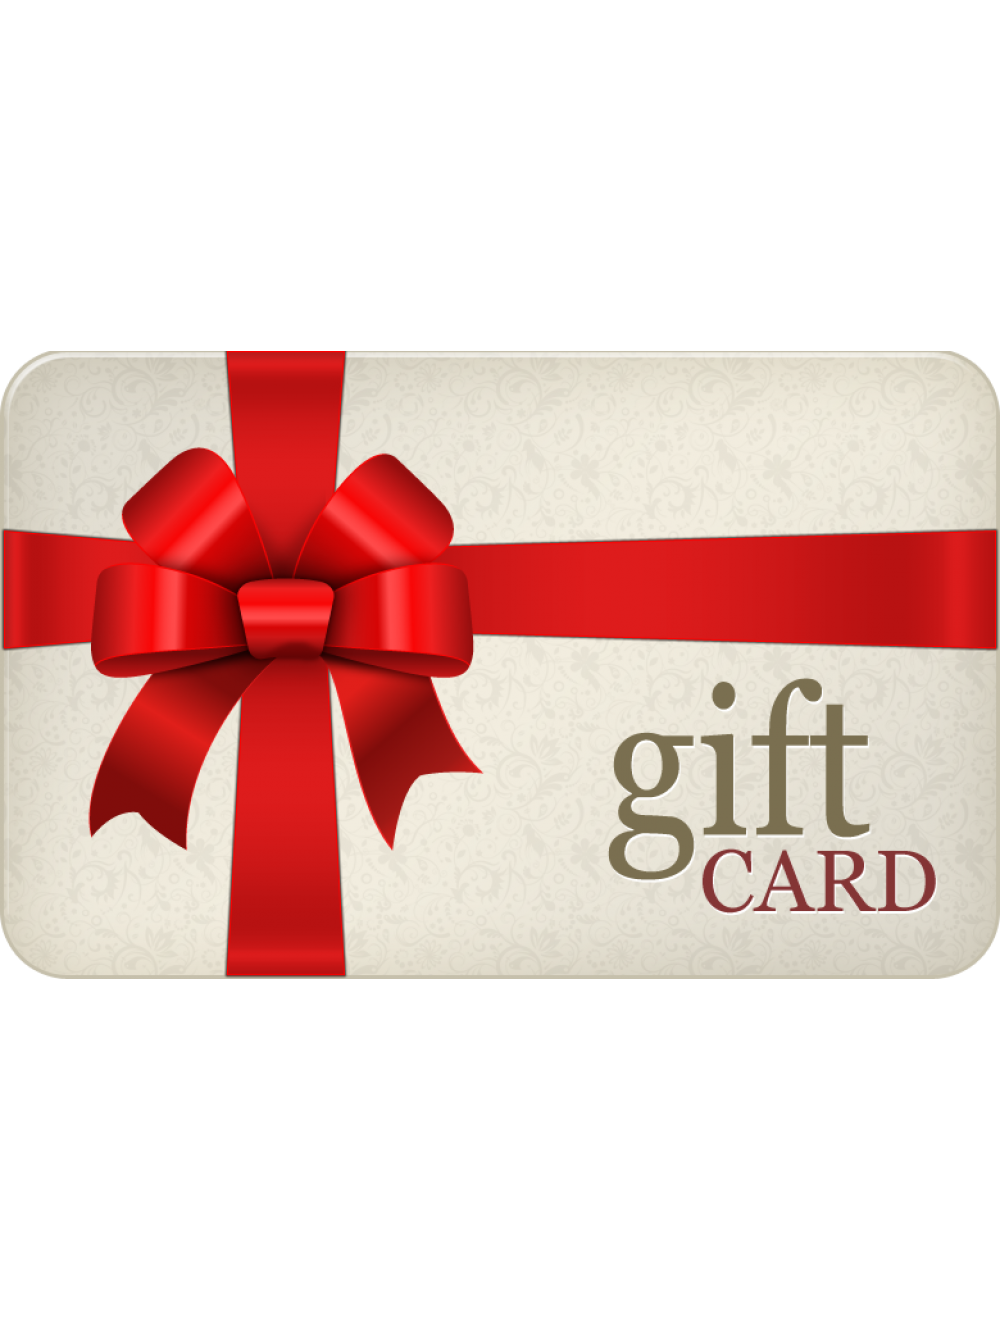 Missile Baits Gift Card